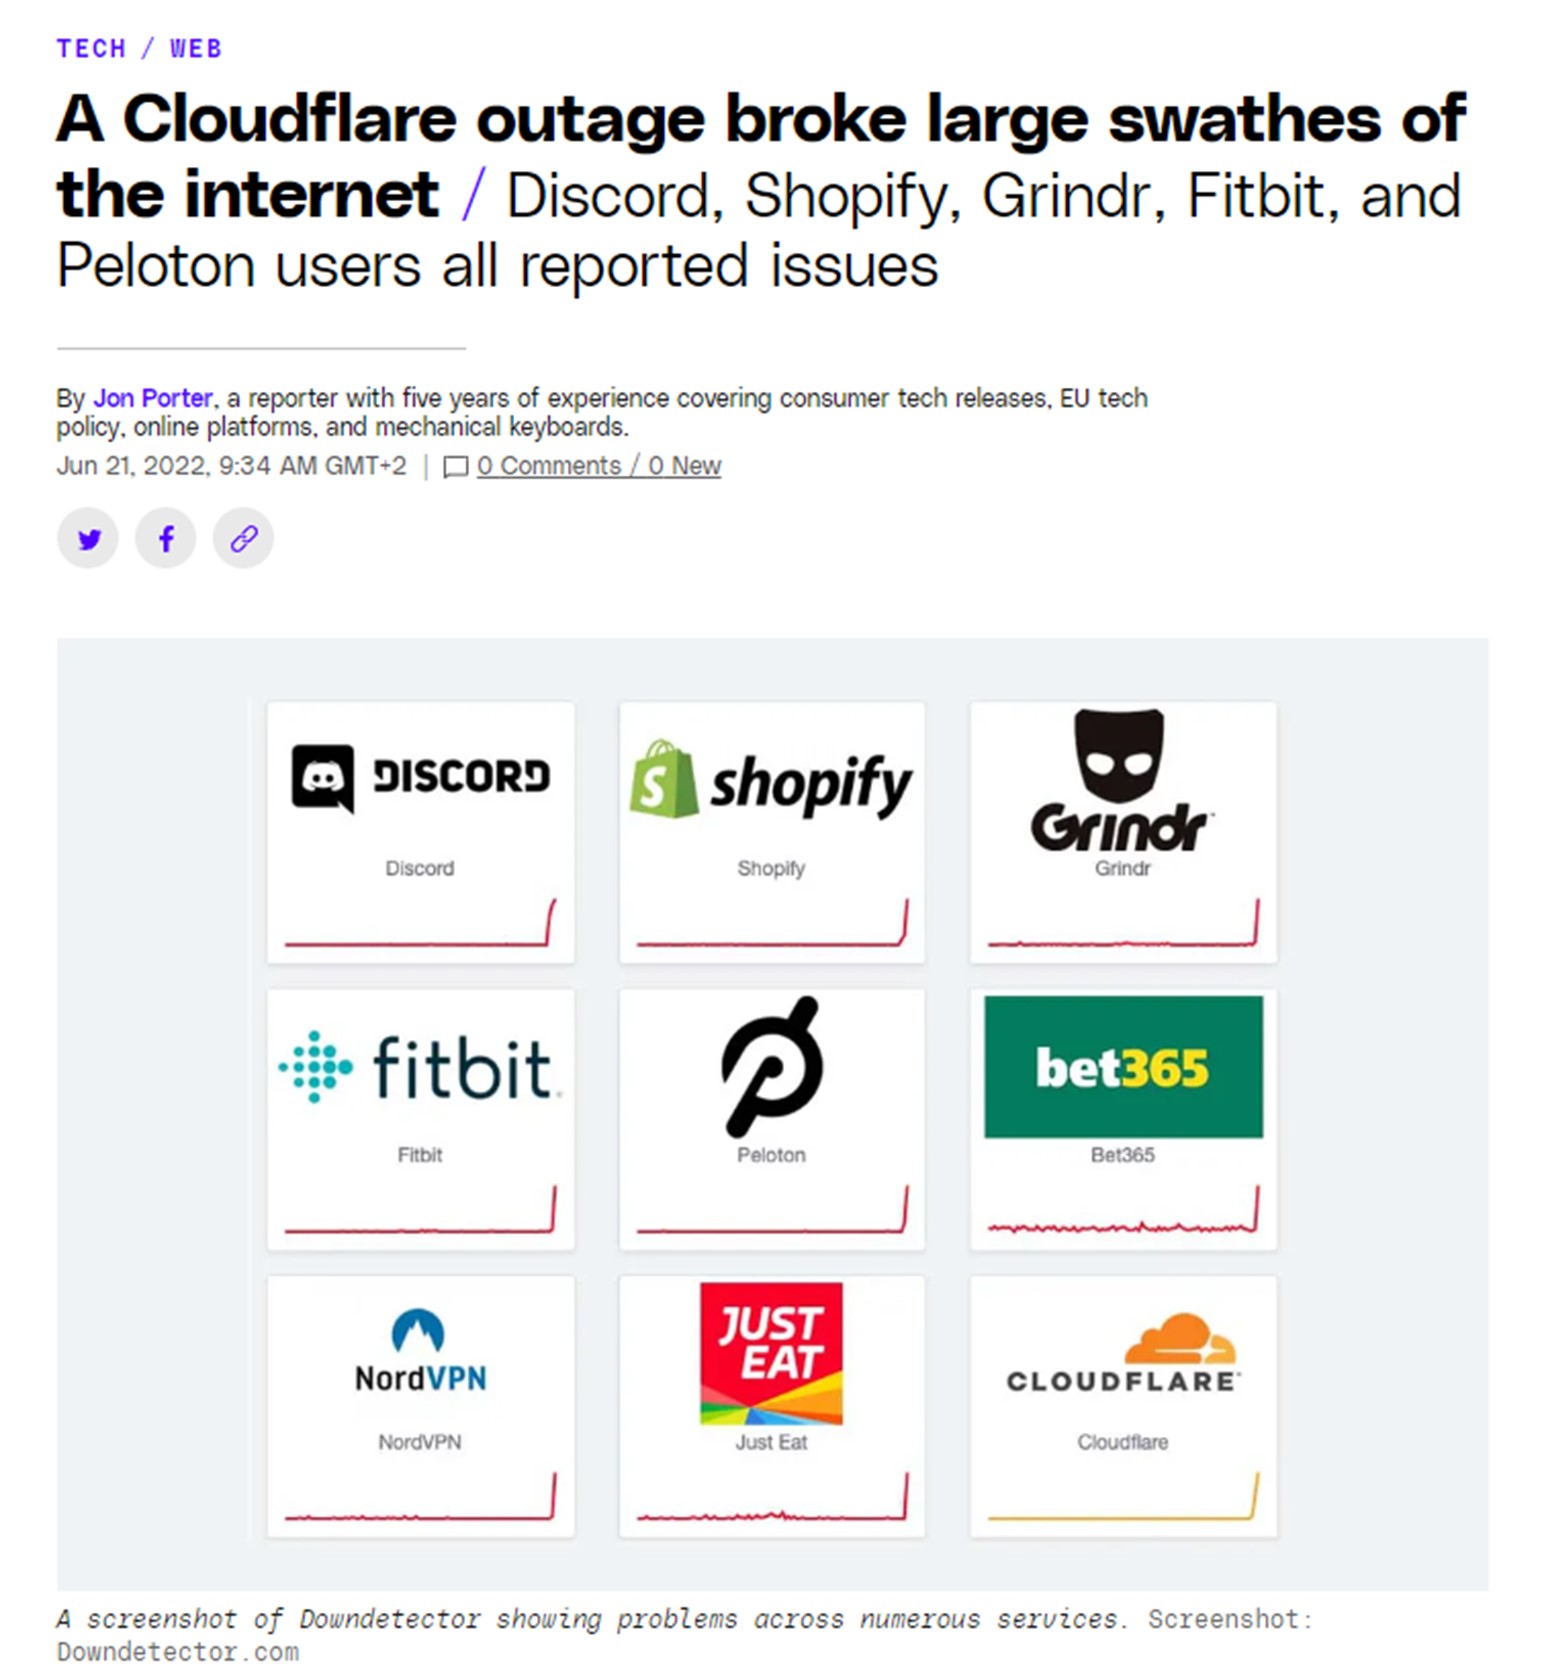 Cloudflare outage title screenshot